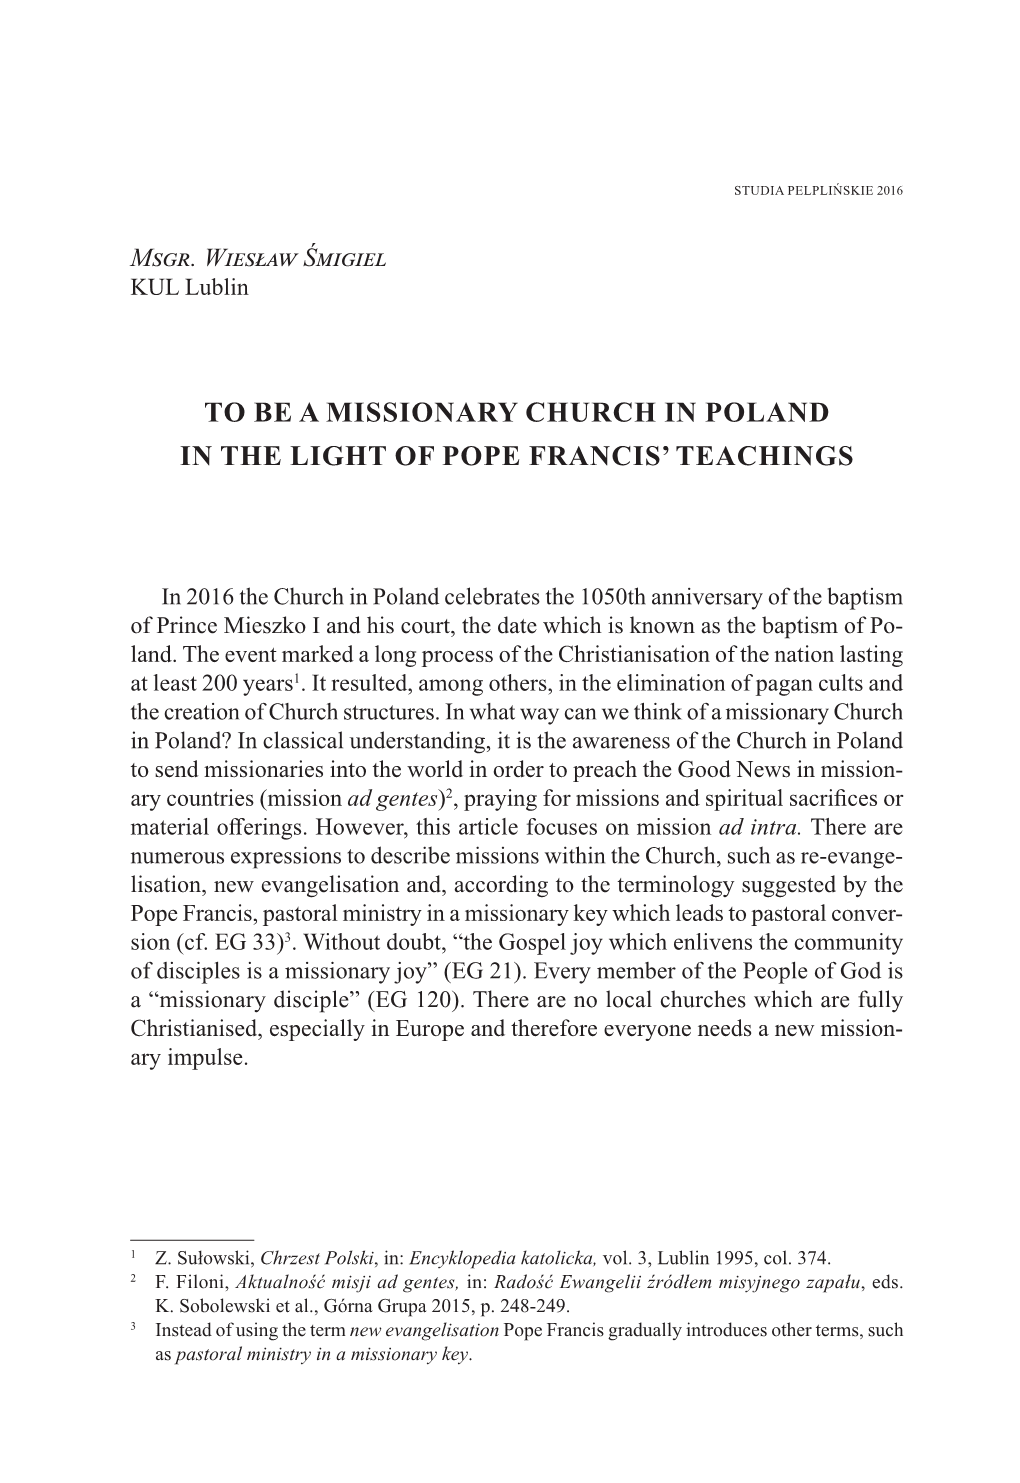 To Be a Missionary Church in Poland in the Light of Pope Francis’ Teachings